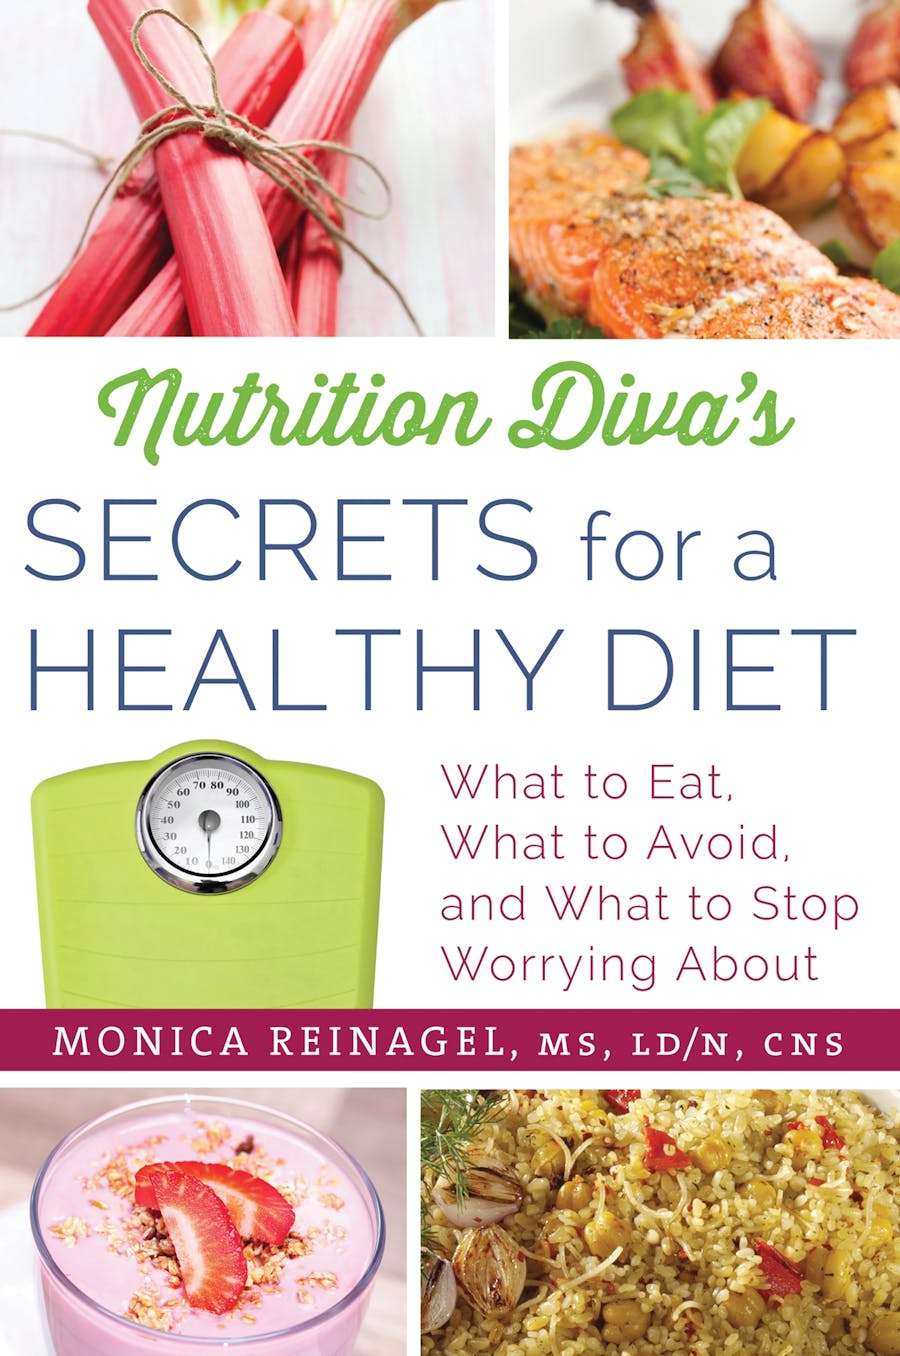 Nutrition Diva’s Secrets for a Healthy Diet by Monica Reinagel